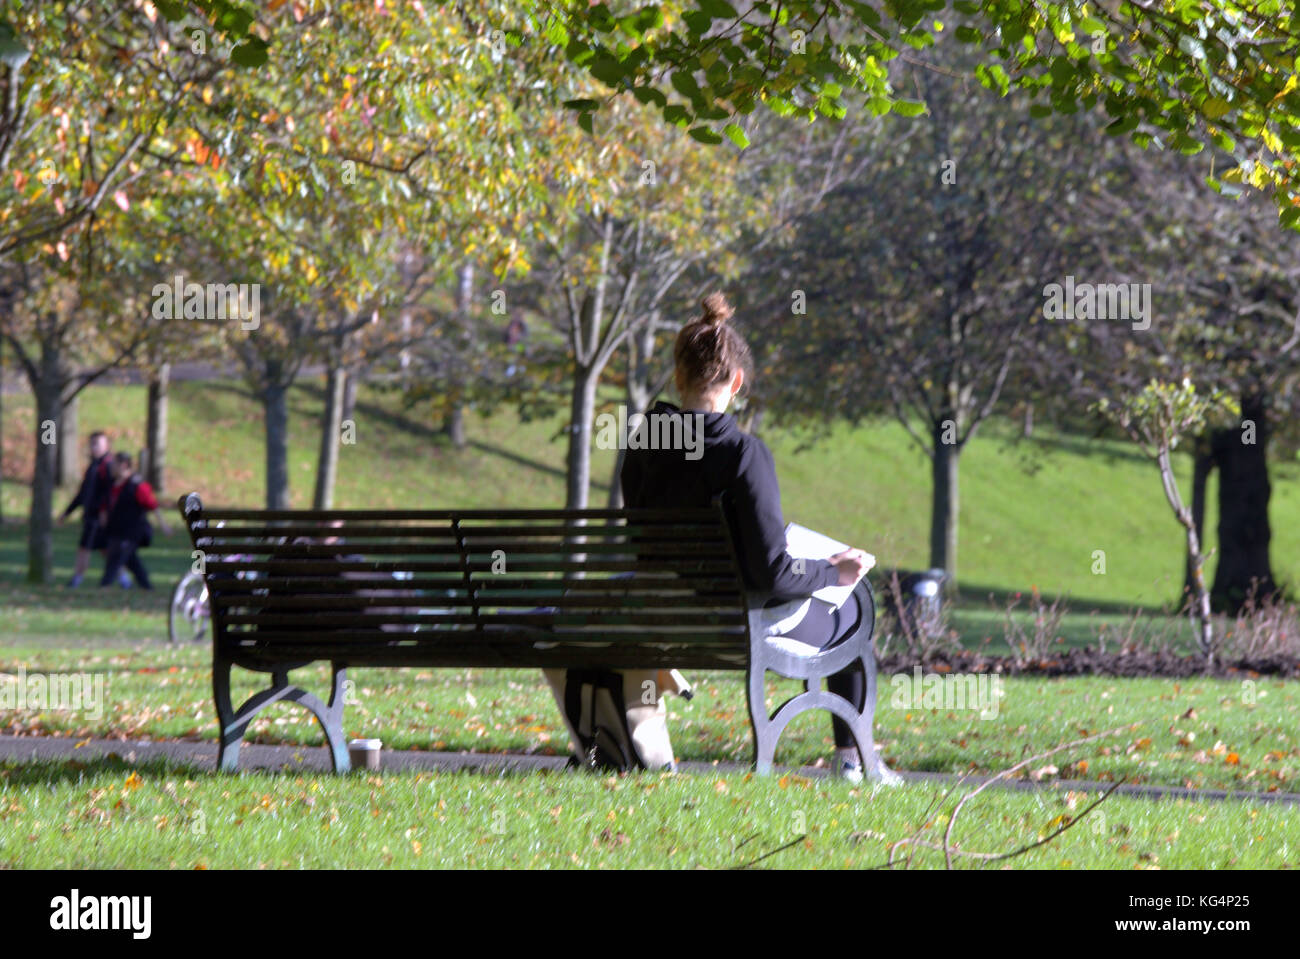 young girl student studying in Kelvingrove Park  sunny day sitting on bench with people in the background viewed from behind Stock Photo